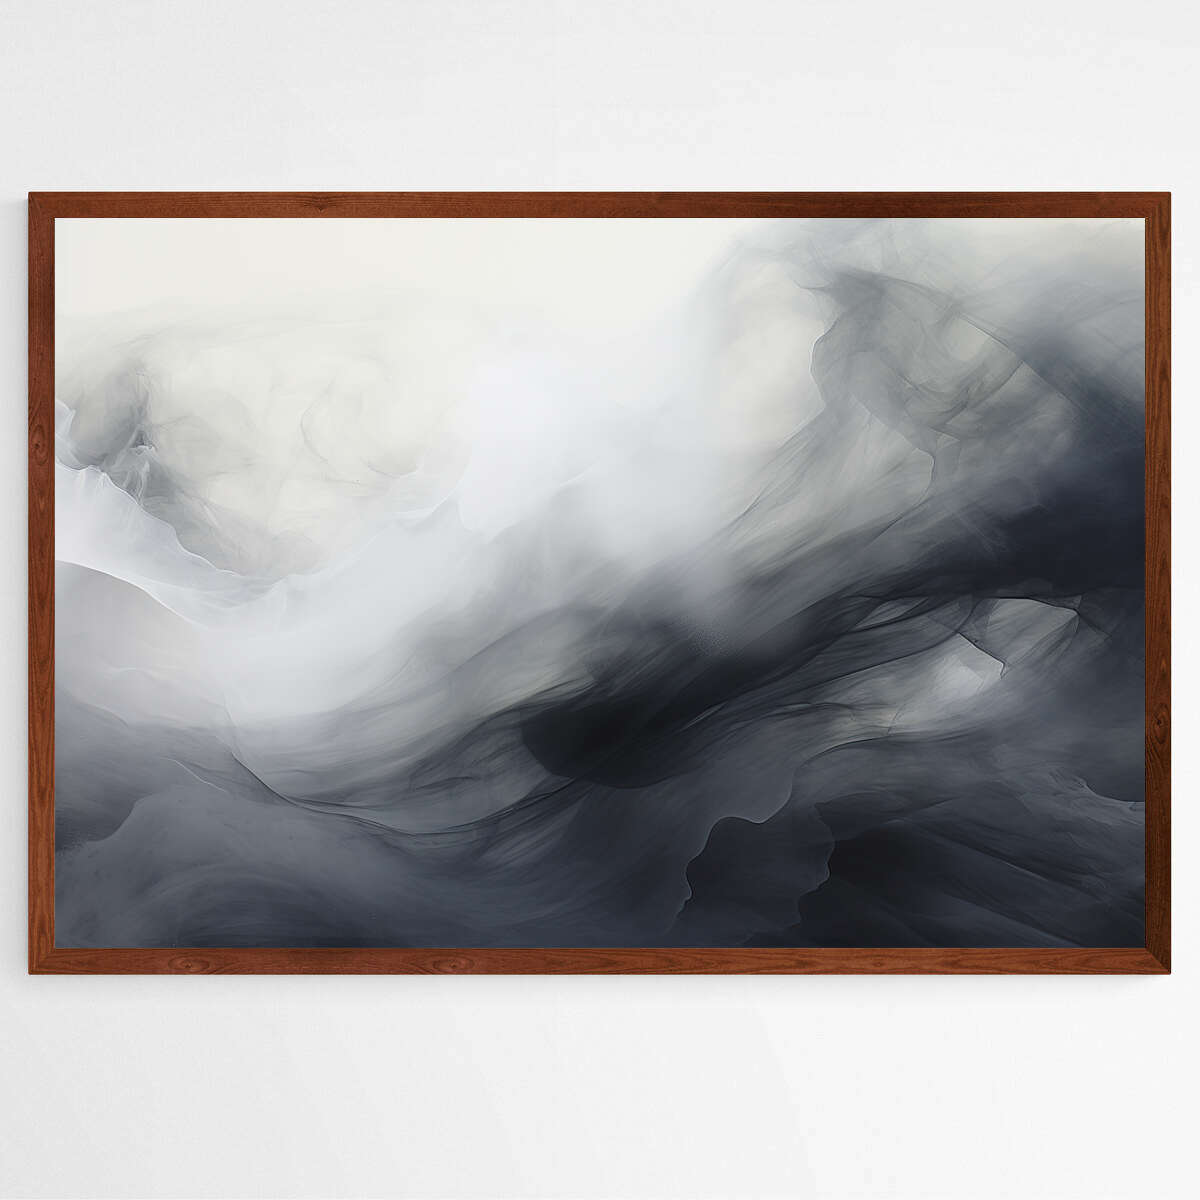 Colliding Grays | Abstract Wall Art Prints - The Canvas Hive